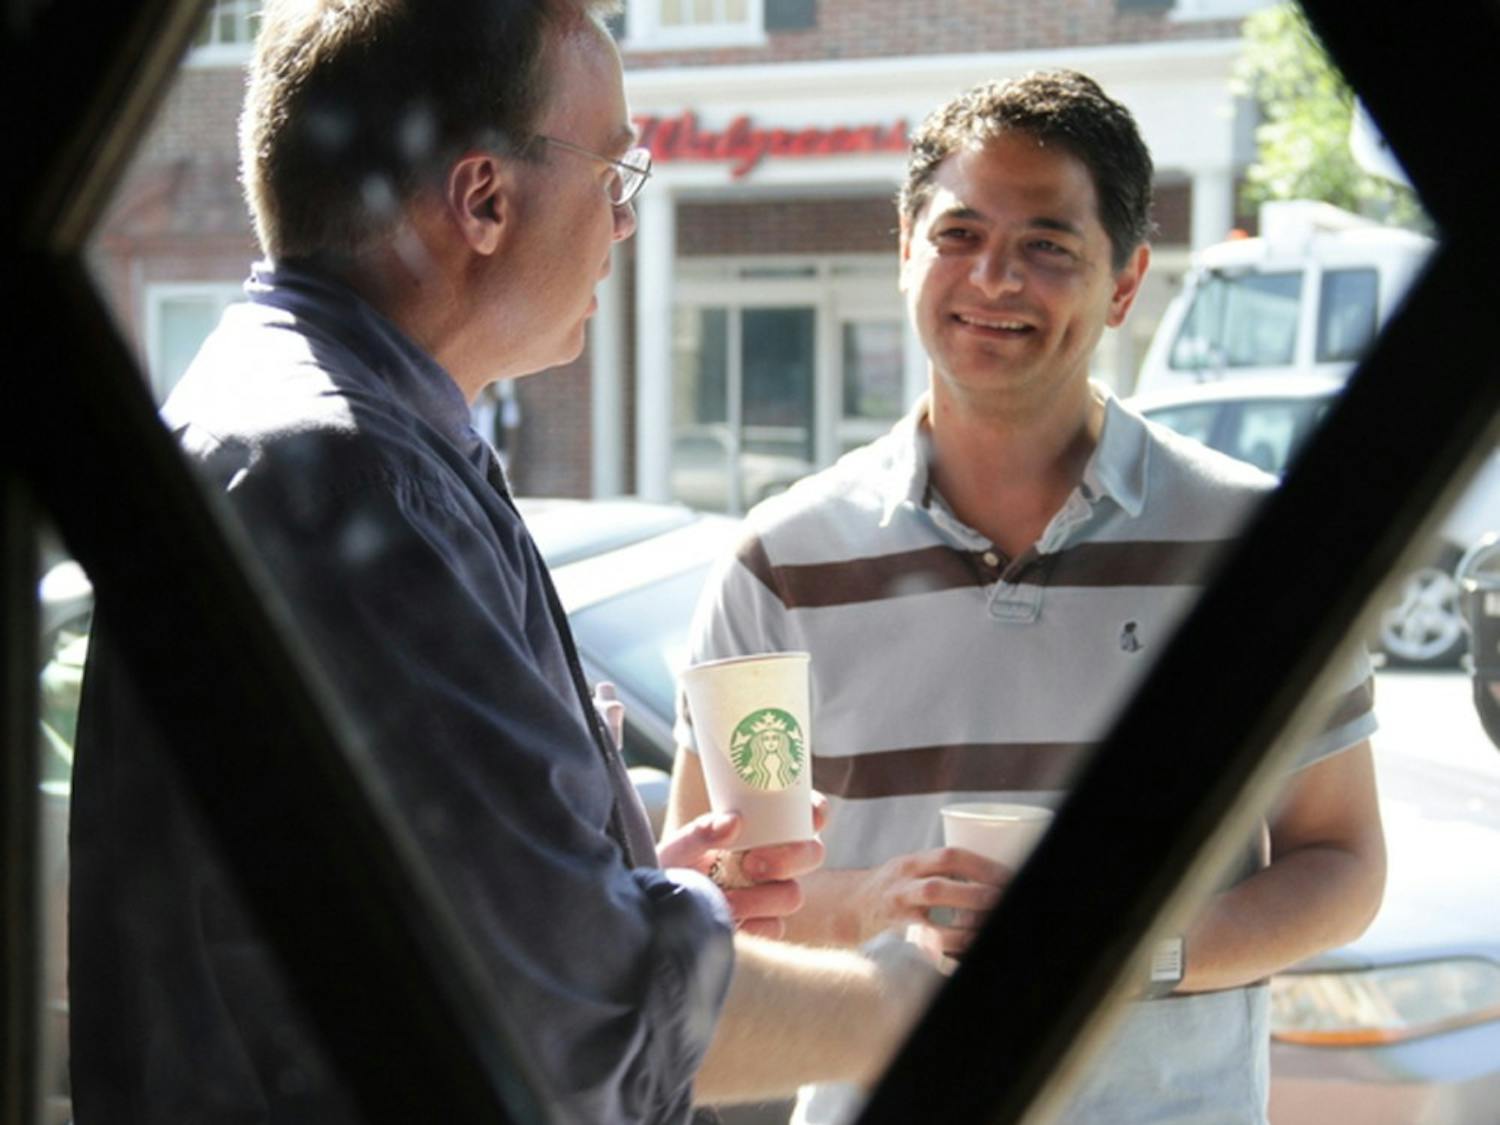 	Chapel Hill Mayor Mark Kleinschmidt discussed the issue of alternative transportation with Carl Schuler, of UNC Hospitals, at the Starbucks on Franklin Street Wednesday. Kleinschmidt rode Chapel Hill Transit to talk to bus riders about the transportation system.